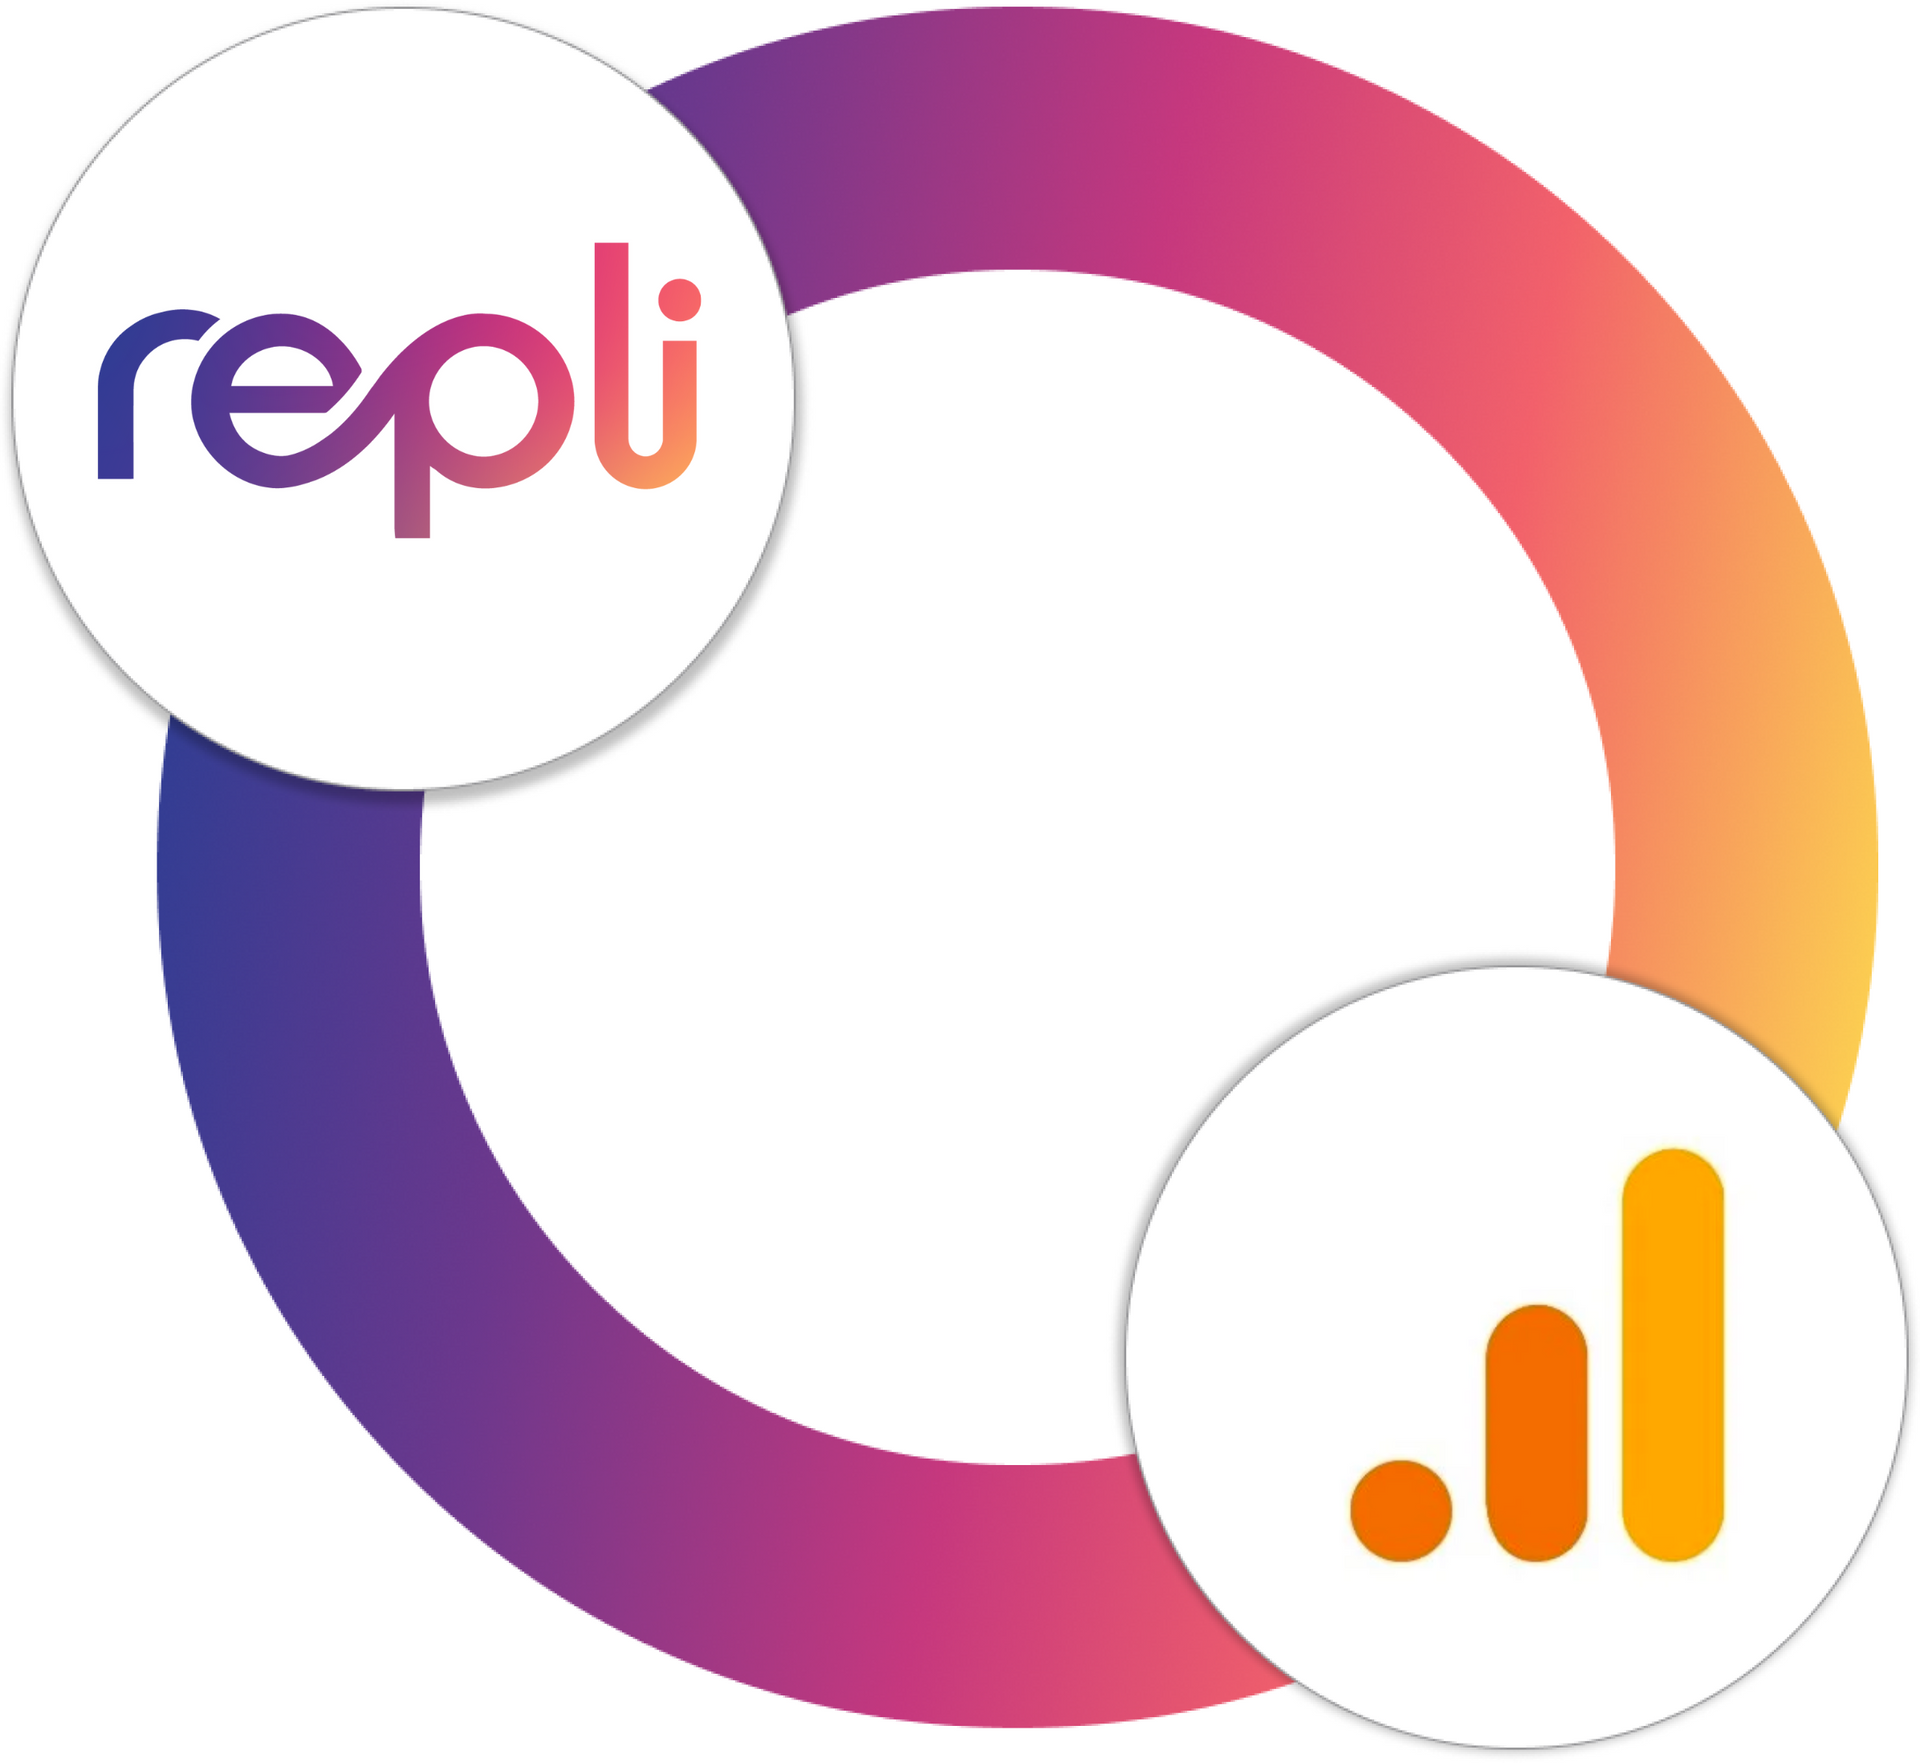 A colorful circle with the Repli logo and Google Analytics 4 logo on it.